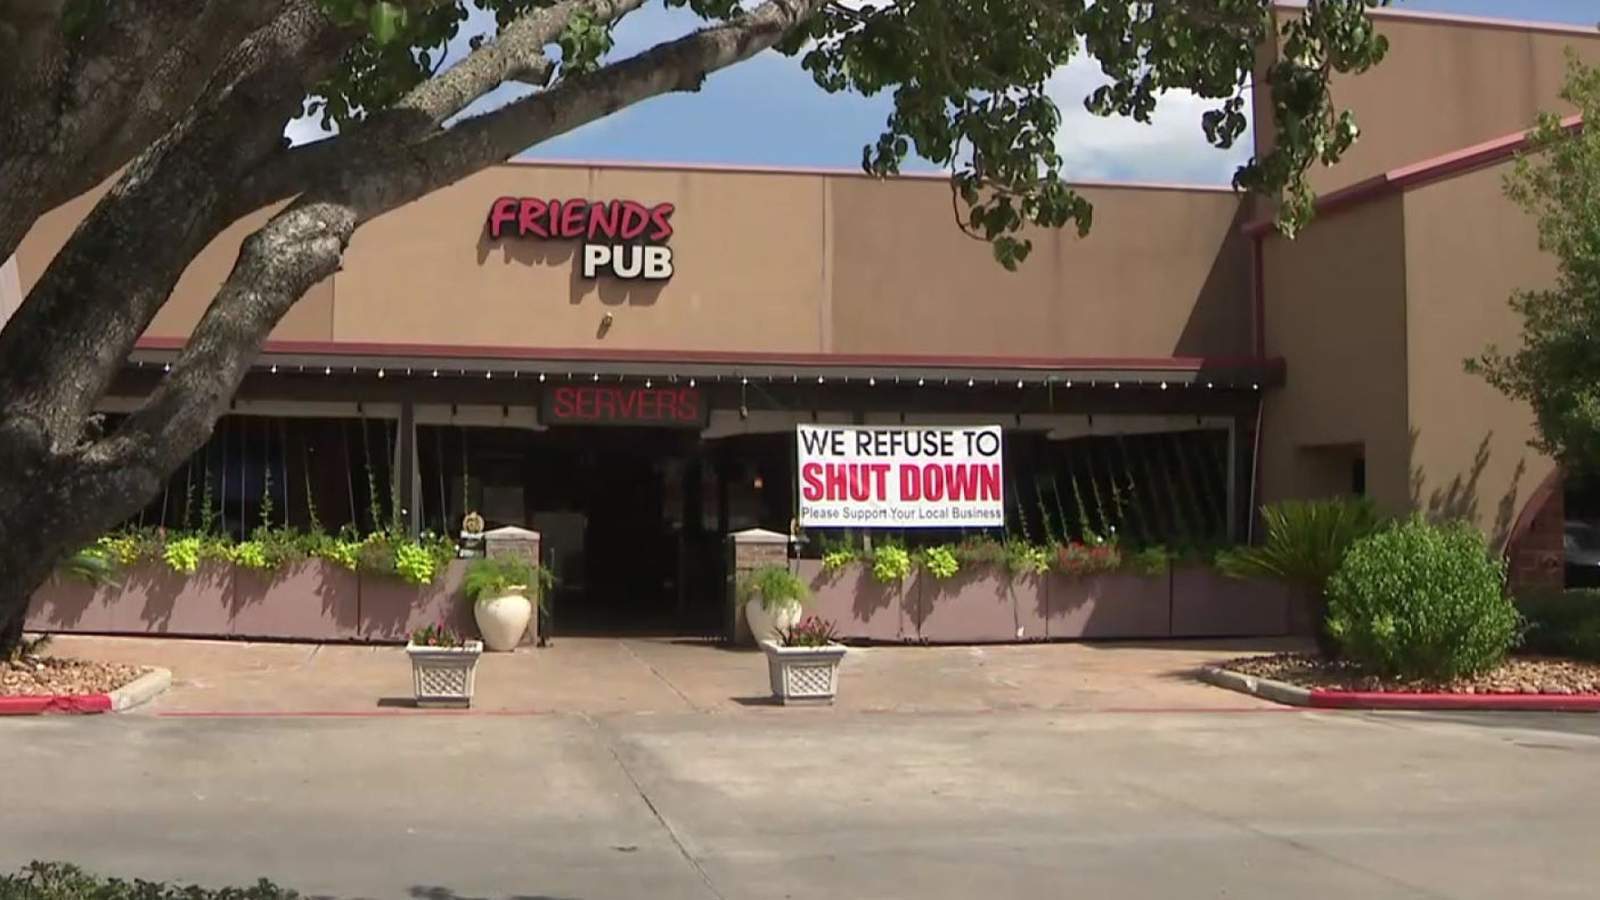 Friendswood bar owners arrested for allegedly interfering with inspection. Couple says they were targetted for refusing to close